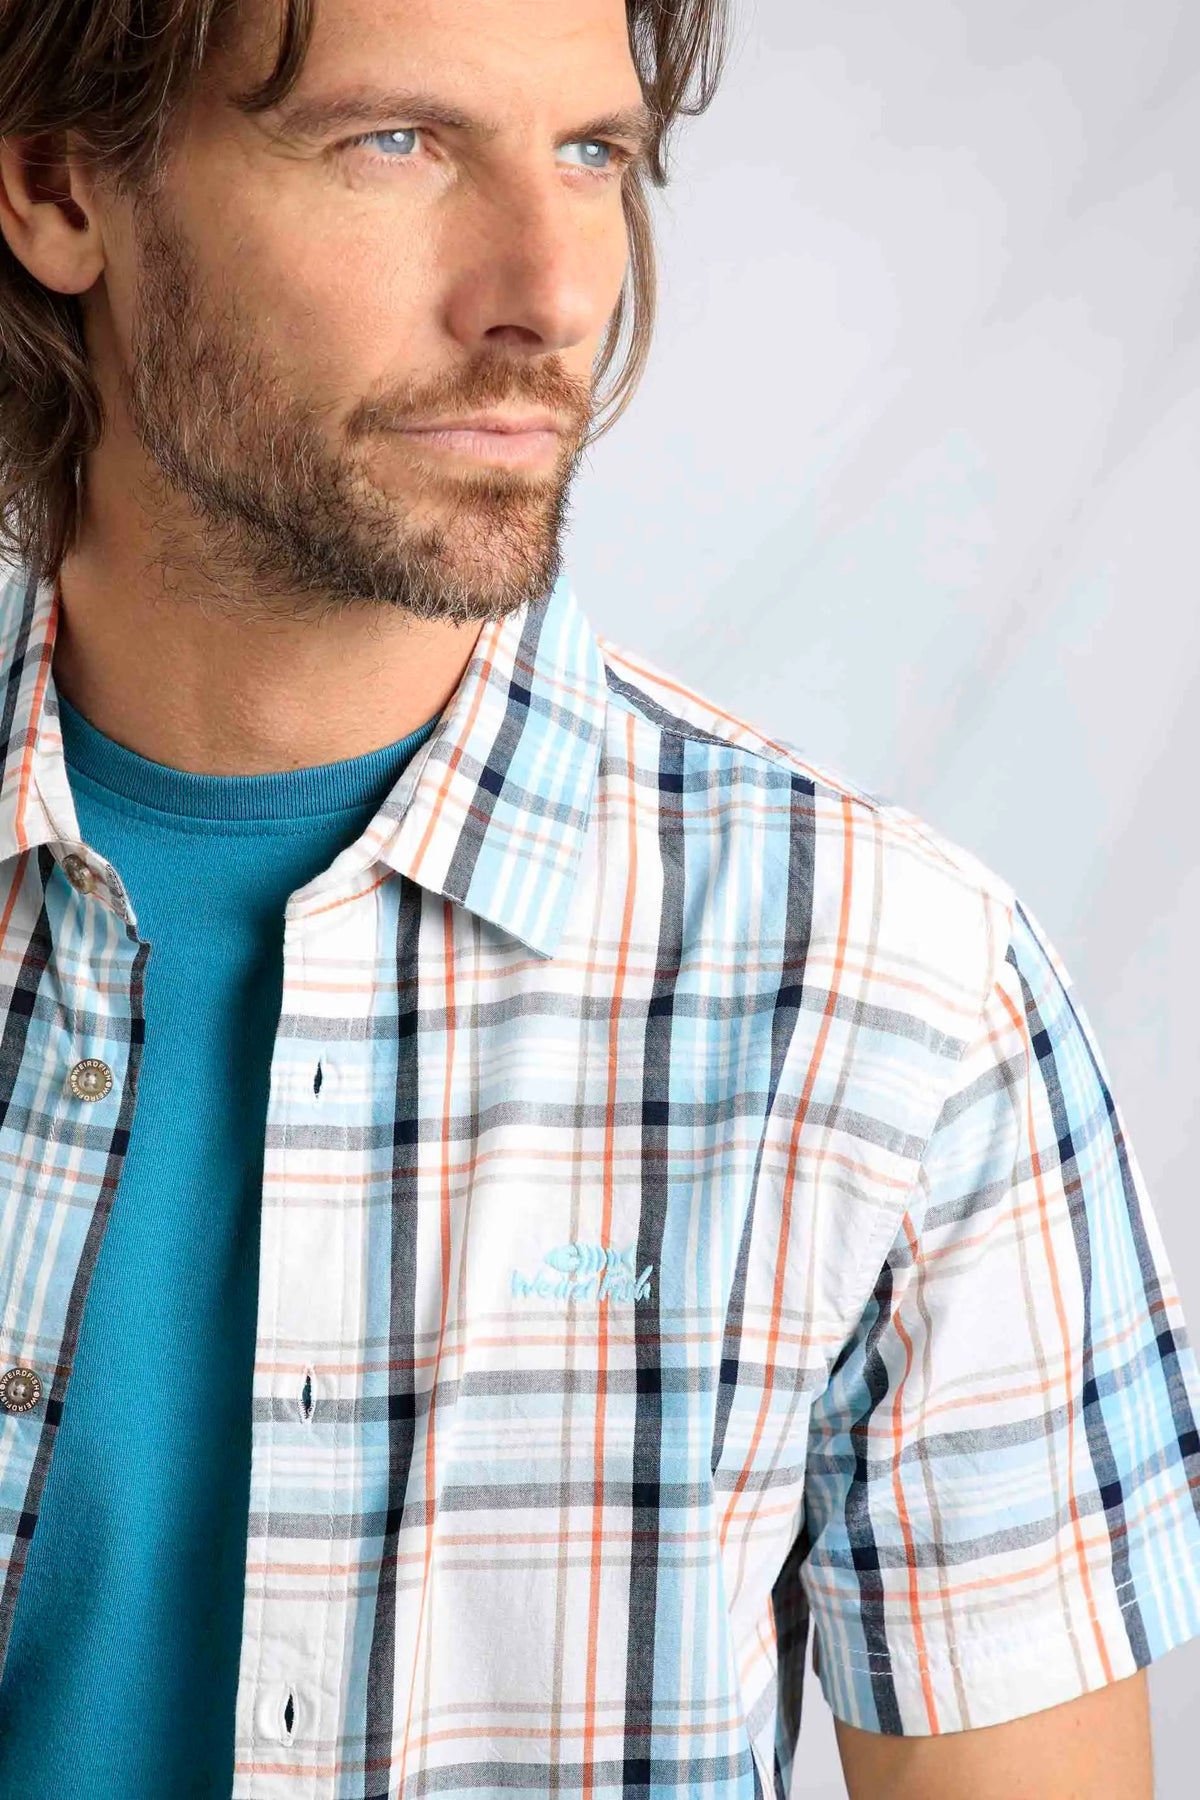 Weird Fish men's Judd short sleeve check shirt in an ecru, blue and orange pattern with embroidered chest logo.